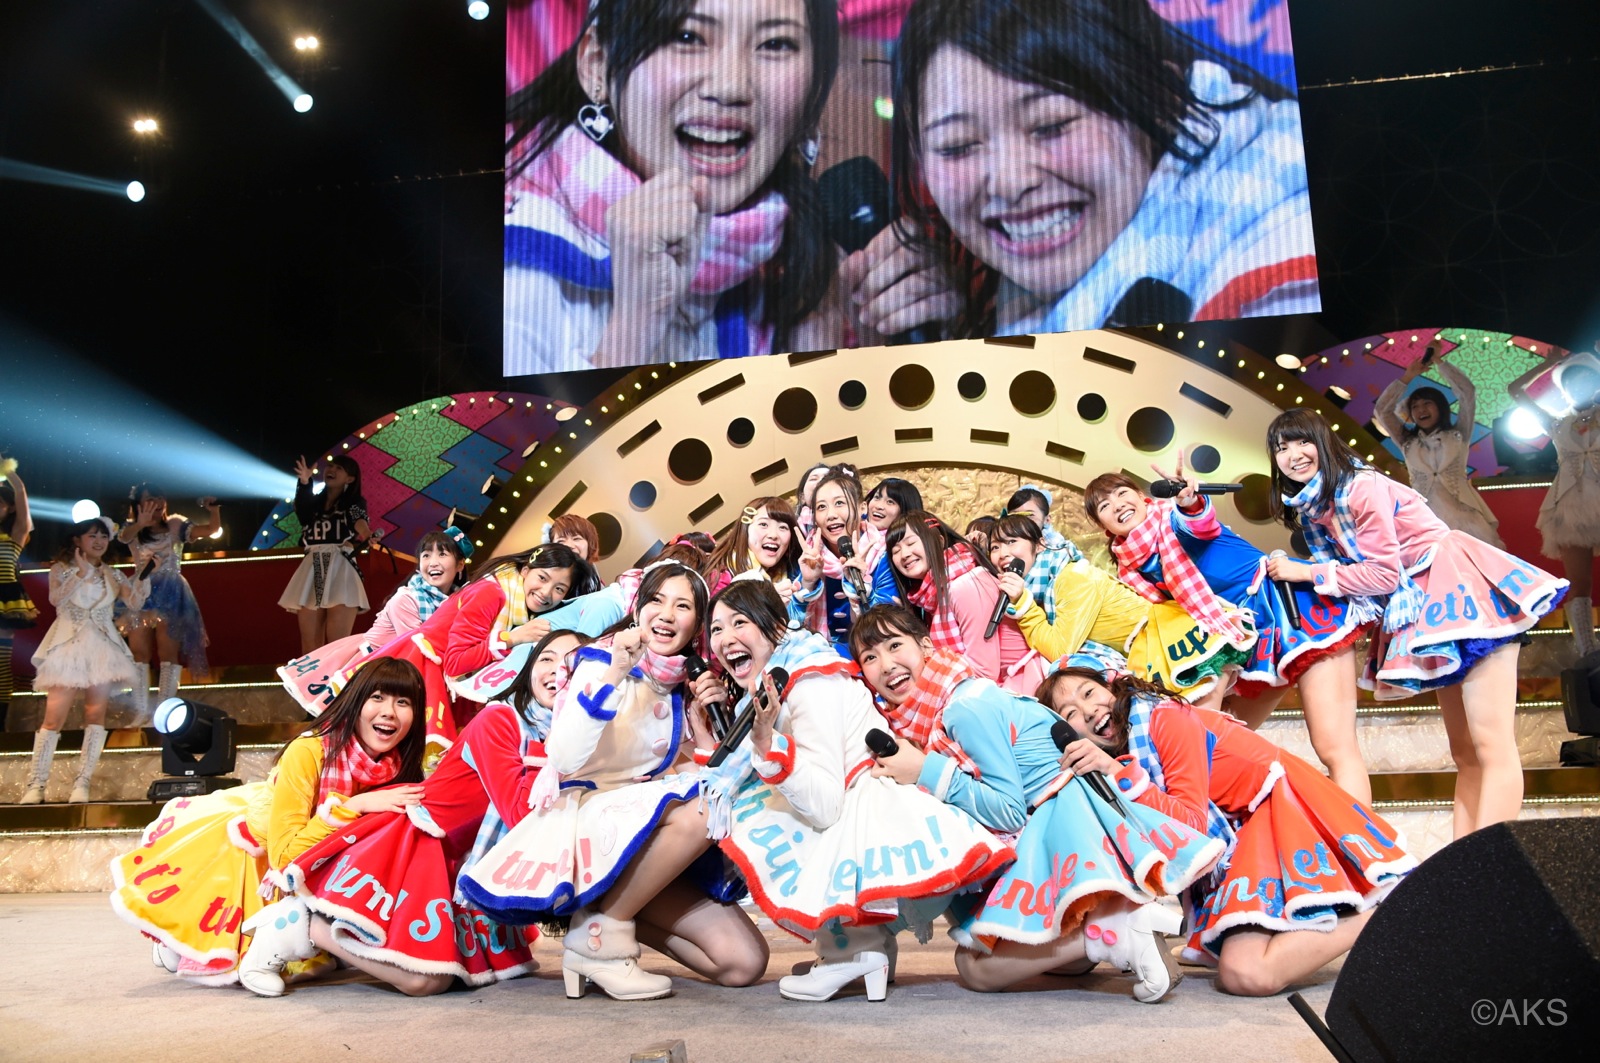 Your Requests are Reflected? SKE48 Request Hour Results from Day 2 of Winter 2015 Concert